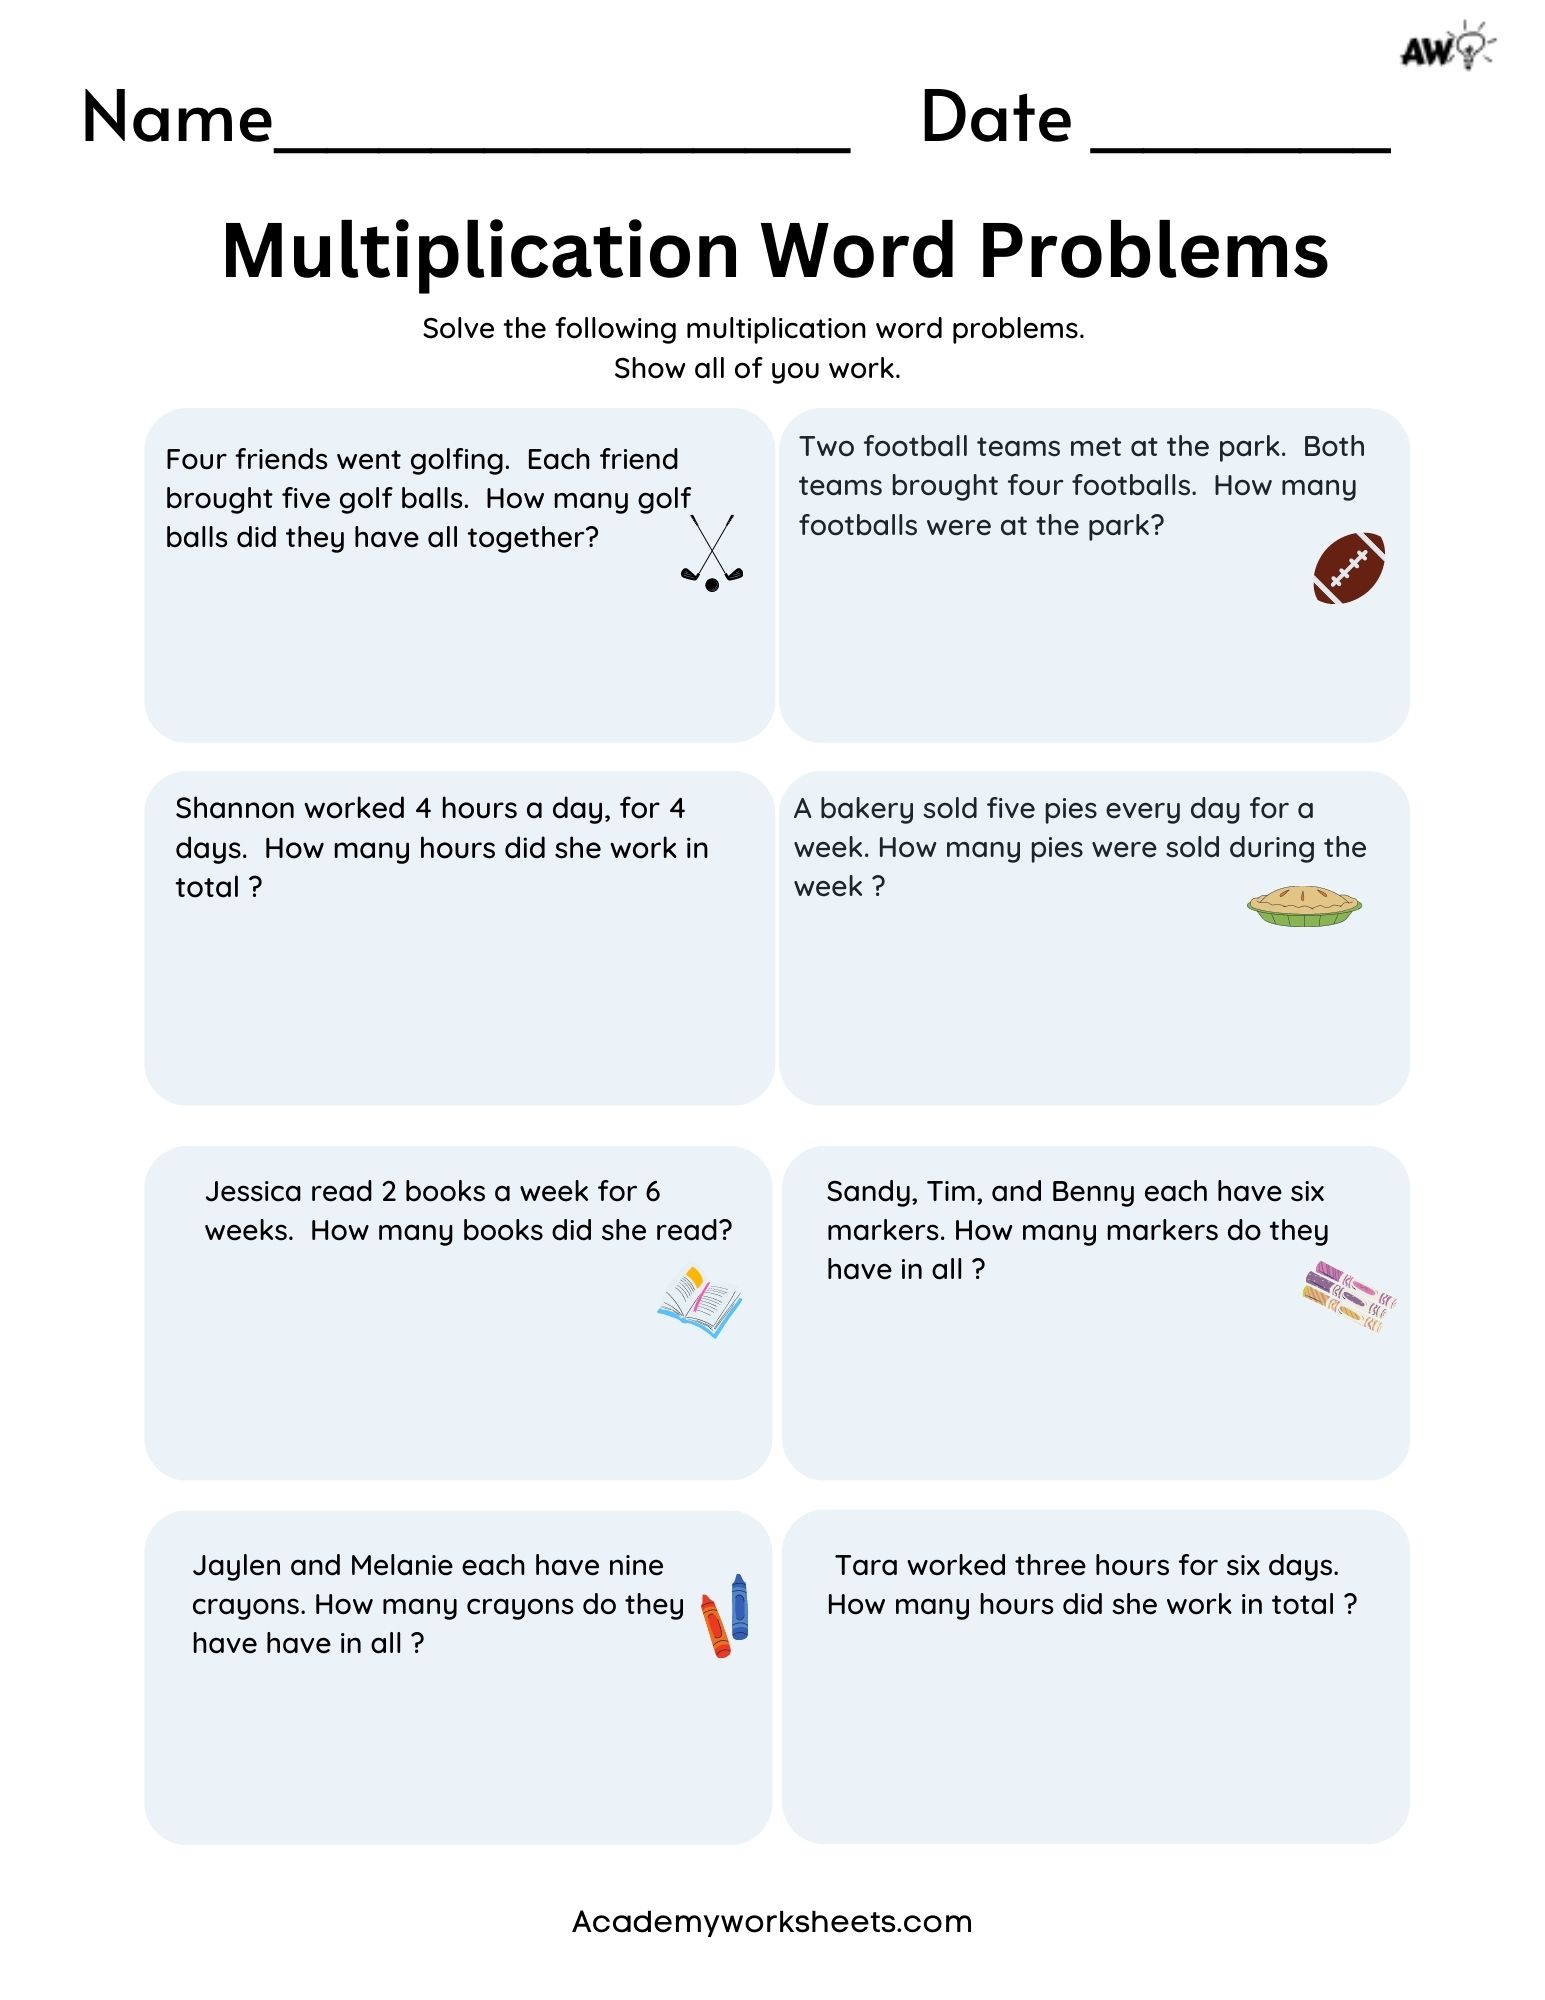 multiplication word problems class 2